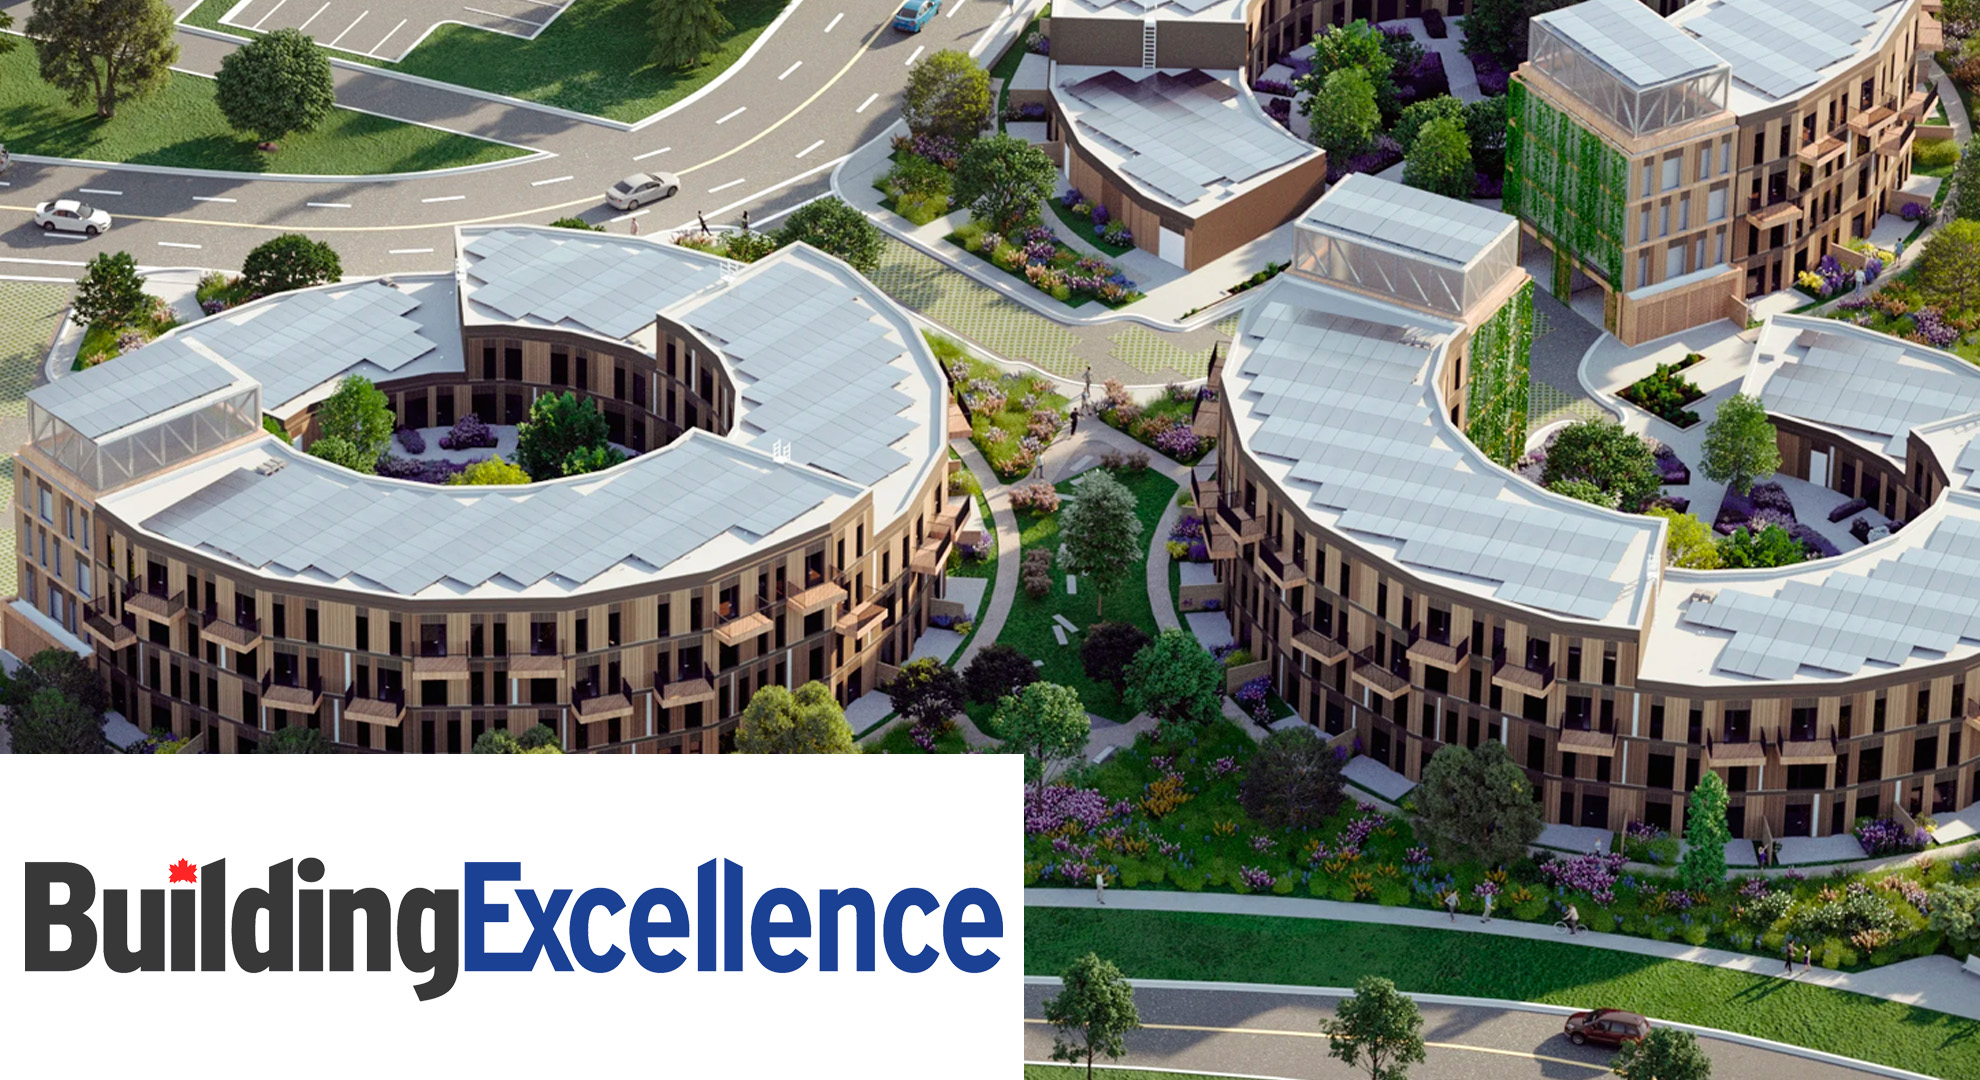 bvuilding-Excellence-article-HDR